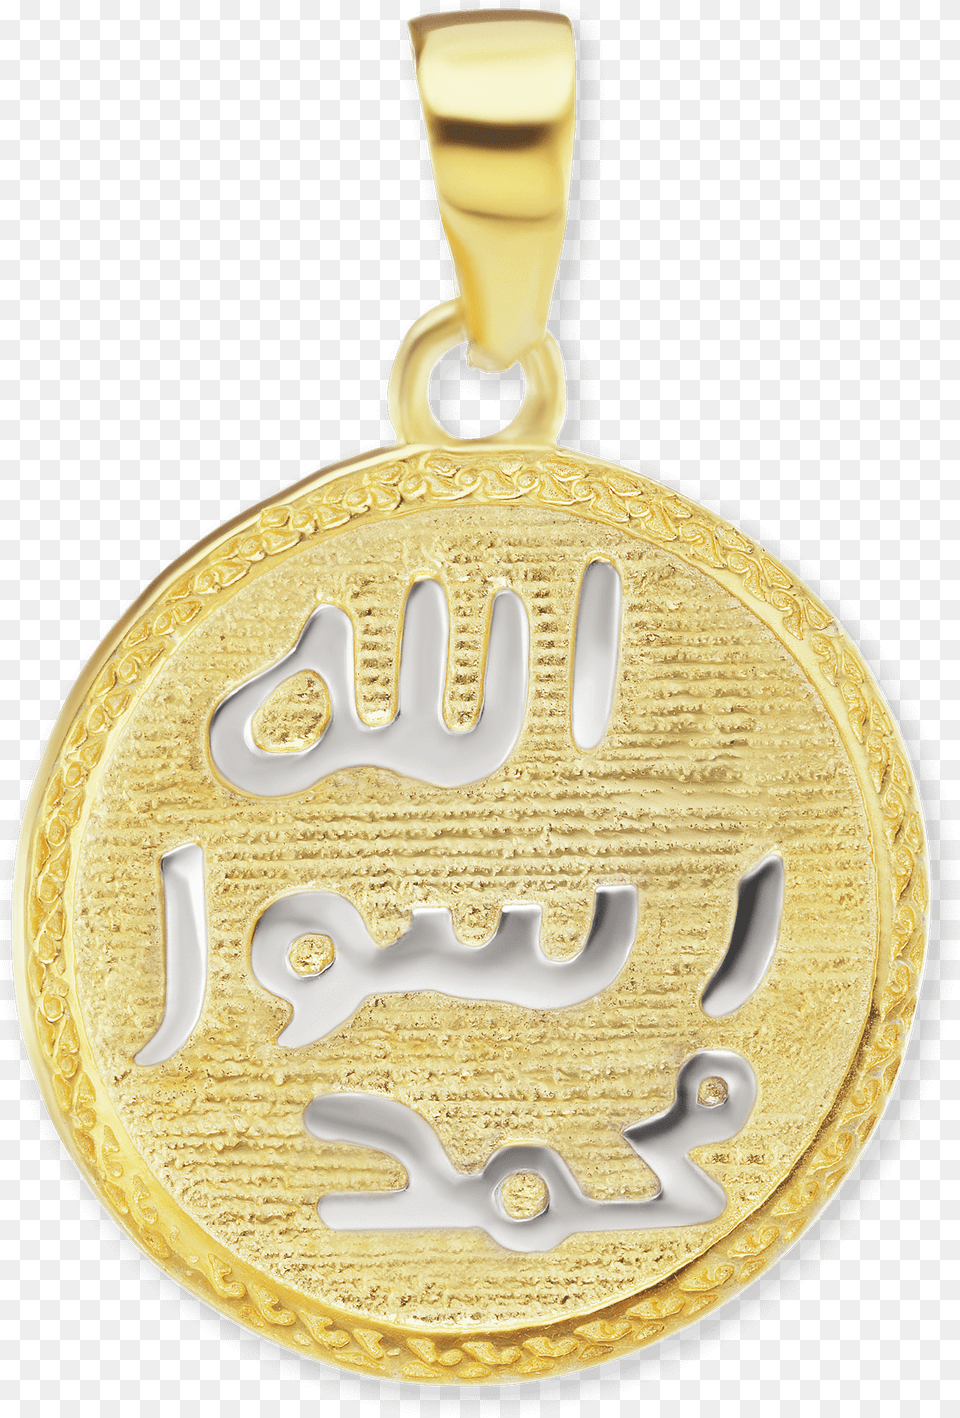 Gold Seal Of Muhammad Medallion 35 X 24 Mm, Accessories, Birthday Cake, Cake, Cream Free Transparent Png